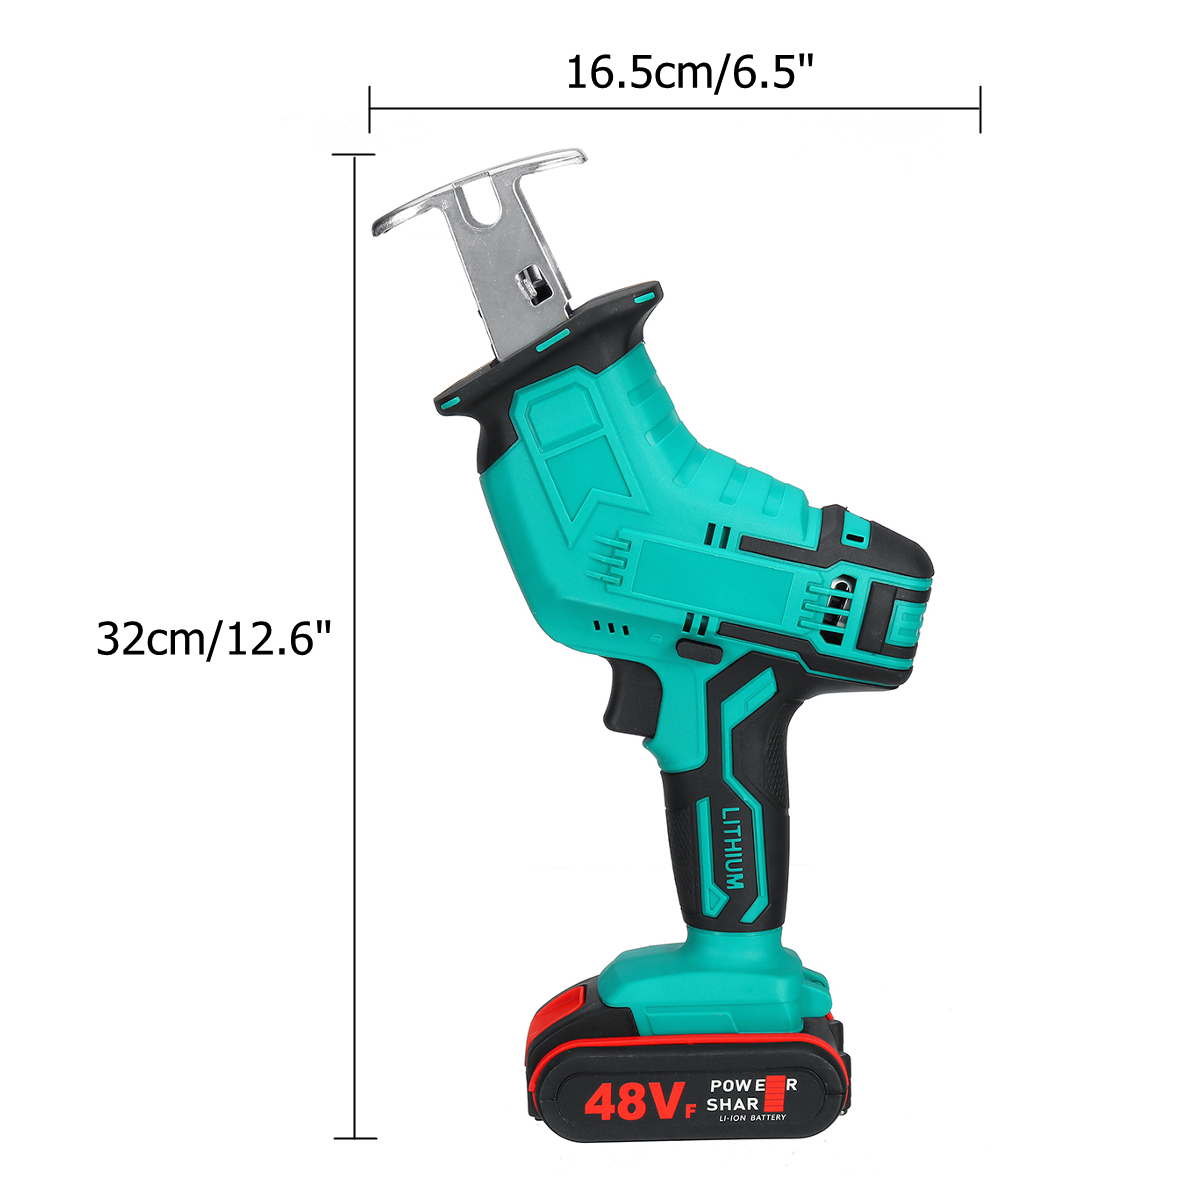 48V-Cordless-Reciprocating-Saw-With-Battery-Charger-recip-Sabre-Saw-New-Power-Tool-1734472-11